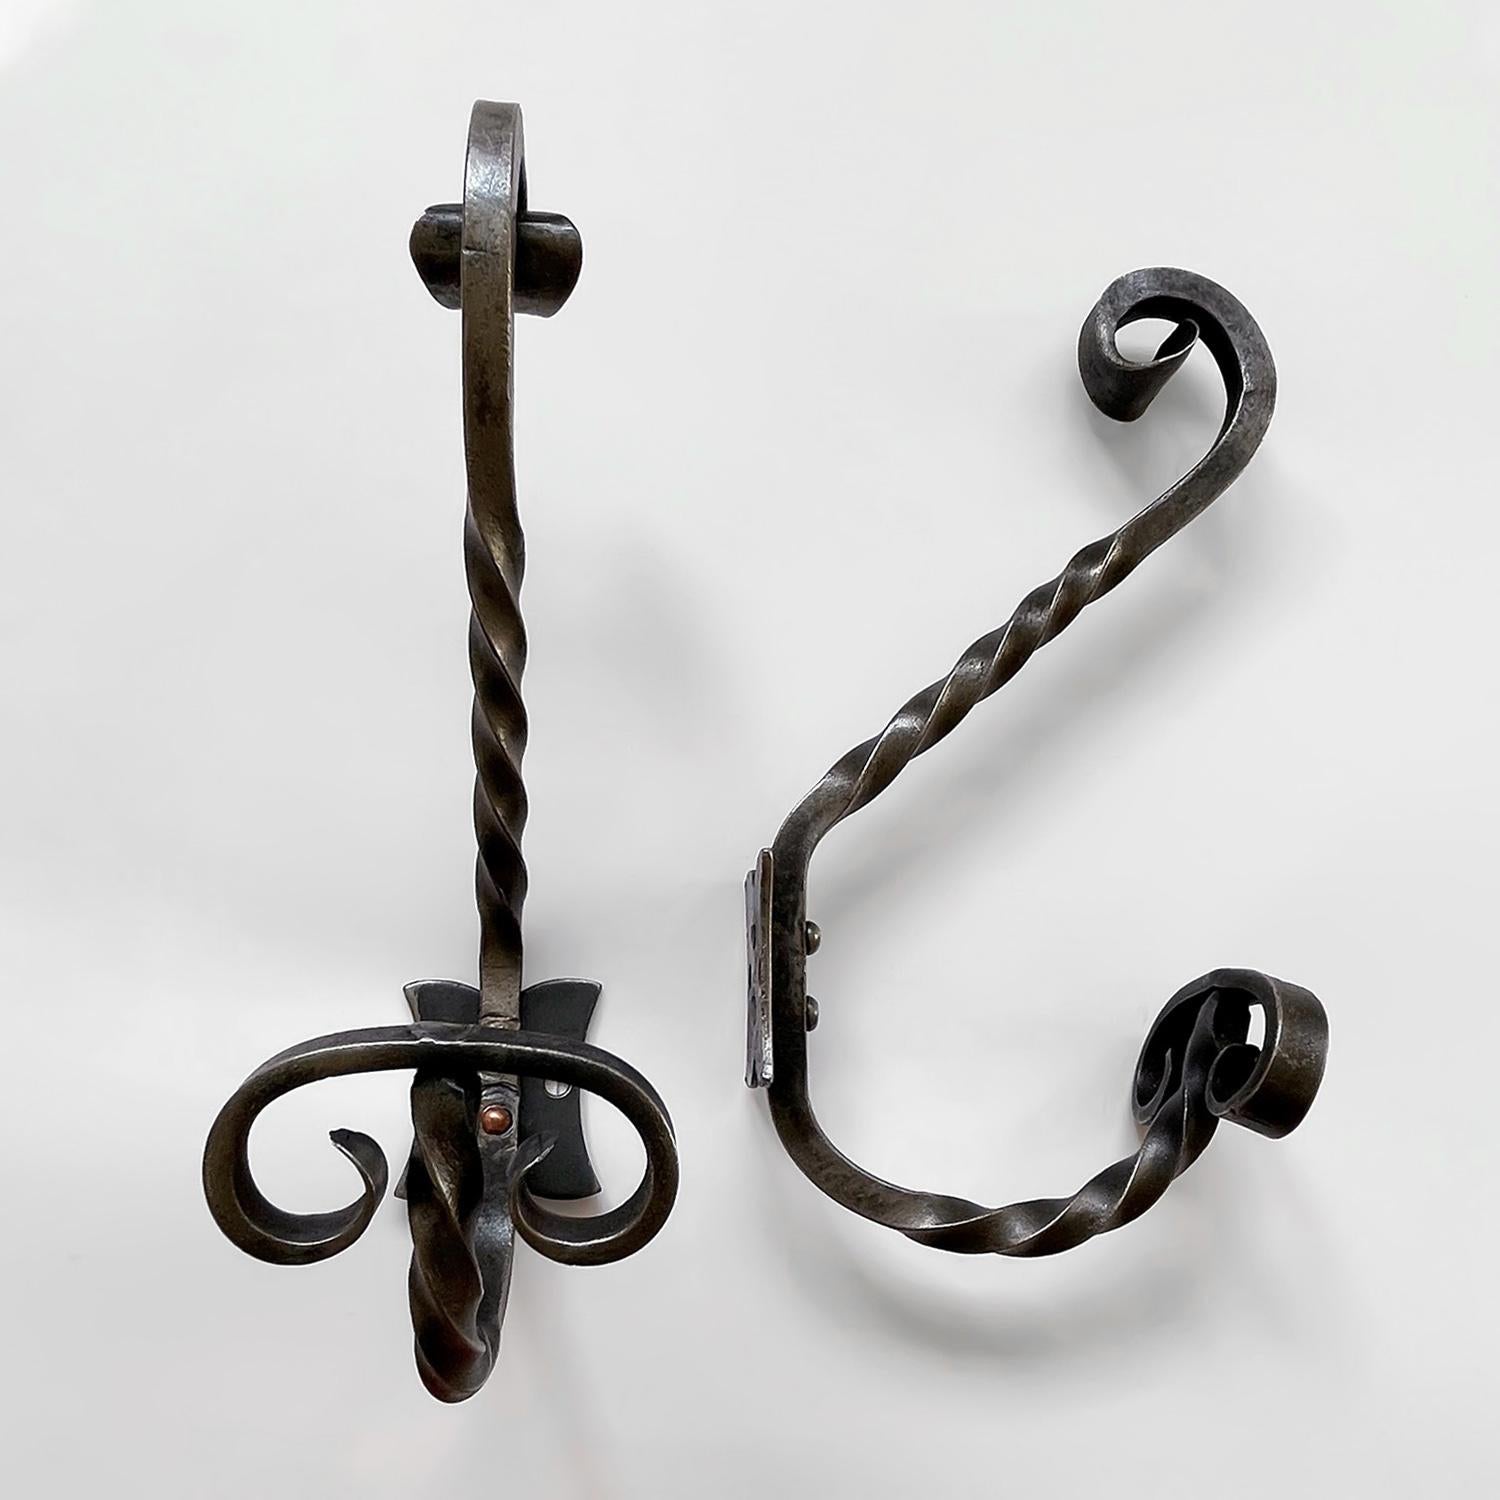 Pair of French twisted wrought iron double hooks
France, mid century
Beautifully sculpted twisted wrought iron J hooks with upper and lower storage
Finished with curved iron detailing
Each wall mounted hook is supported by a single bracket which